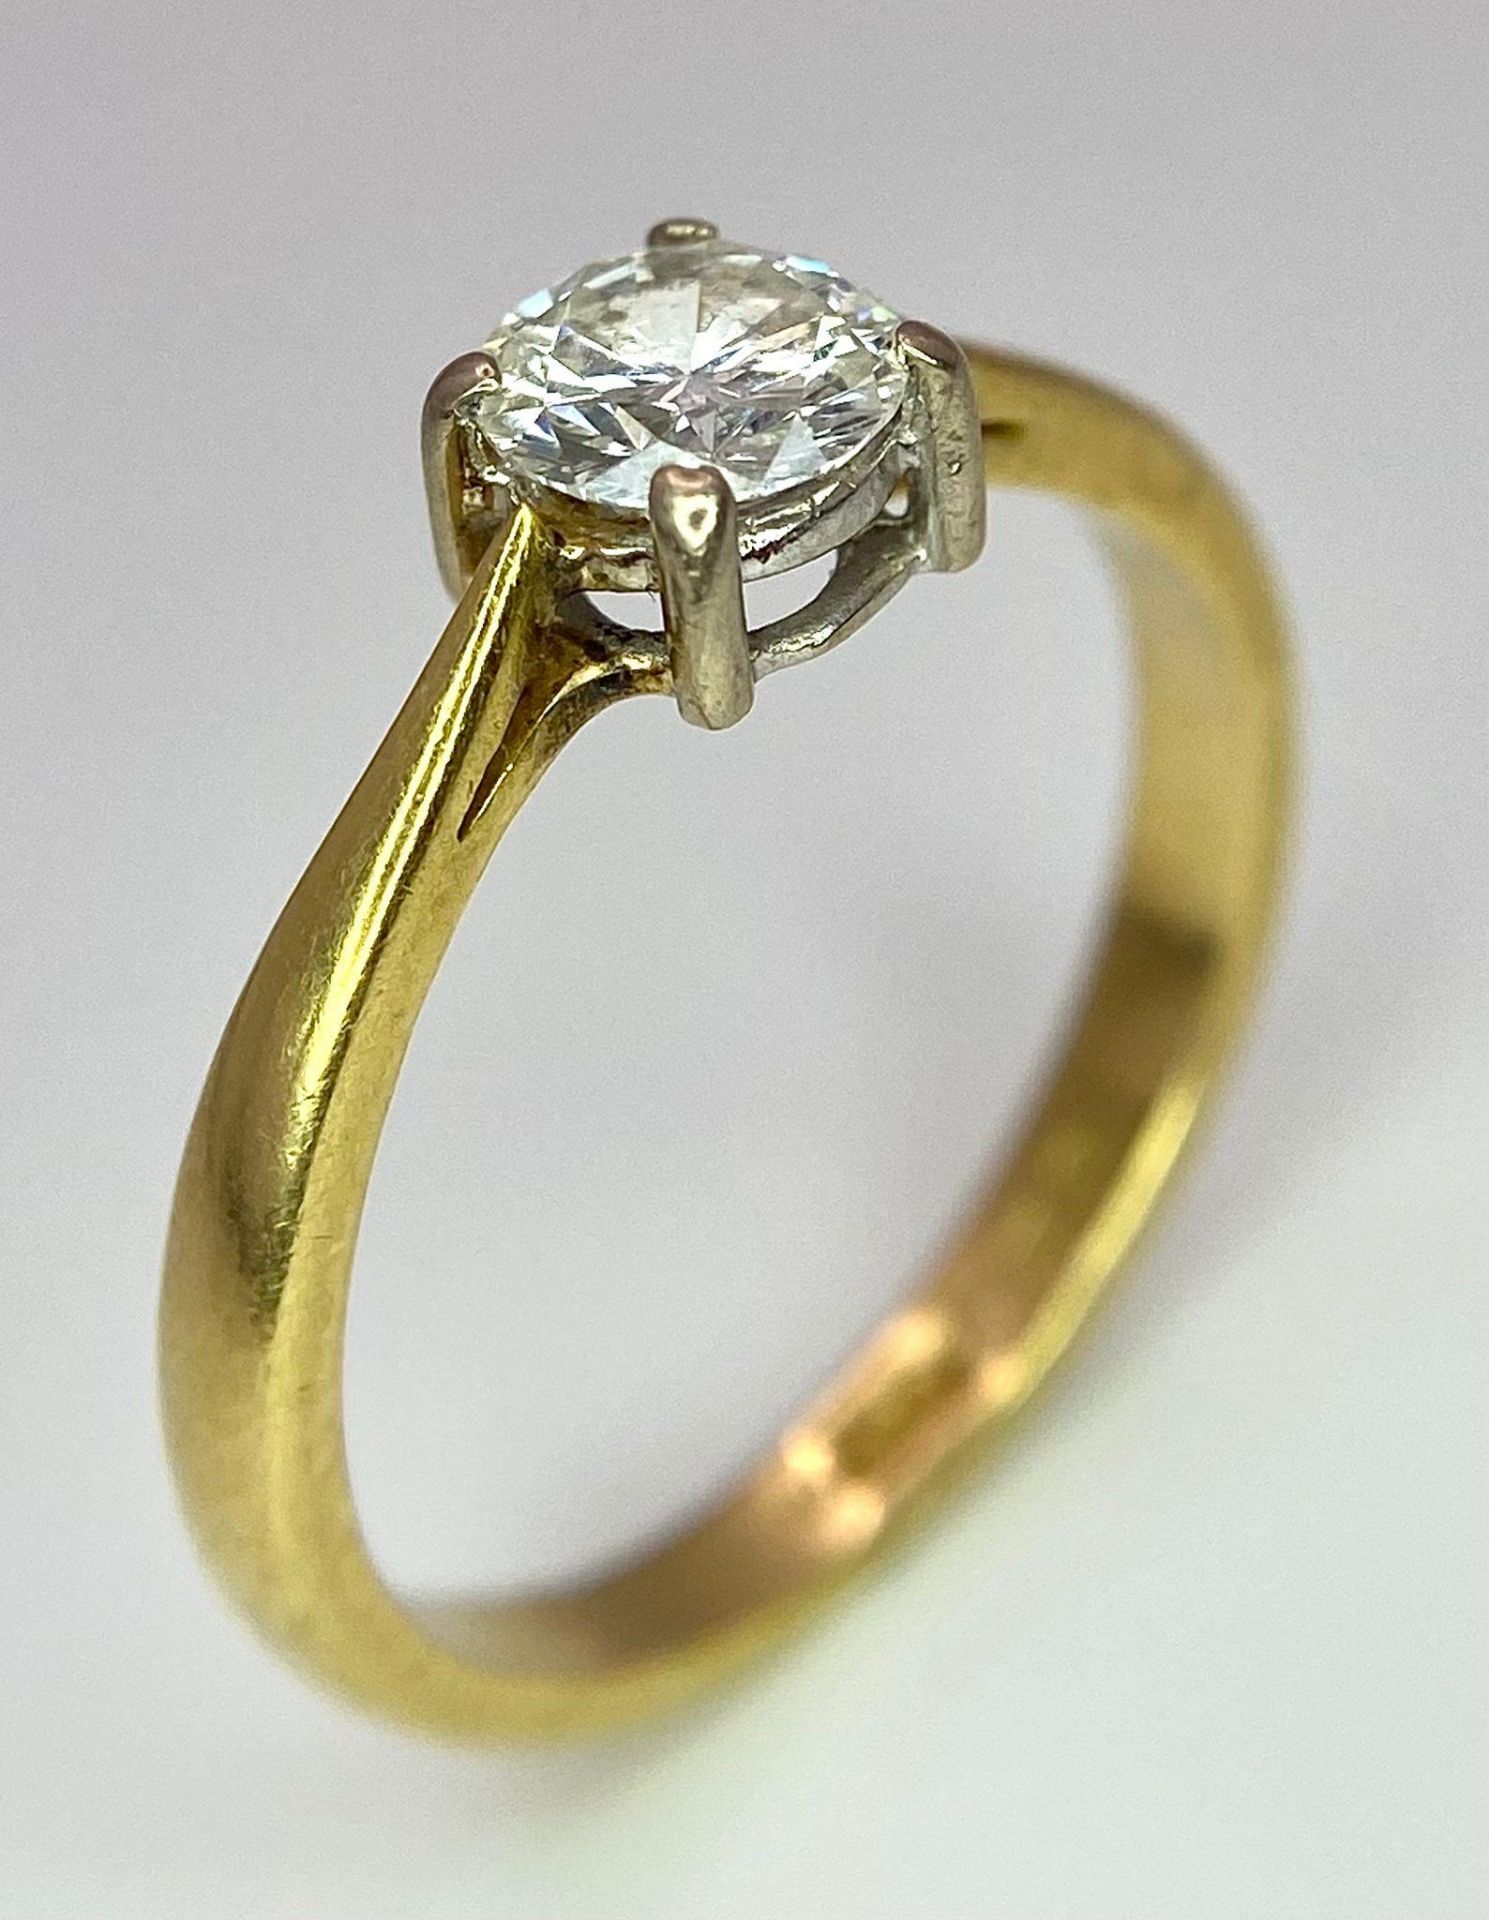 An 18K Yellow Gold Diamond Solitaire Ring. Brilliant round cut - 0.45ctw. 2.5g total weight. Size L. - Image 2 of 7